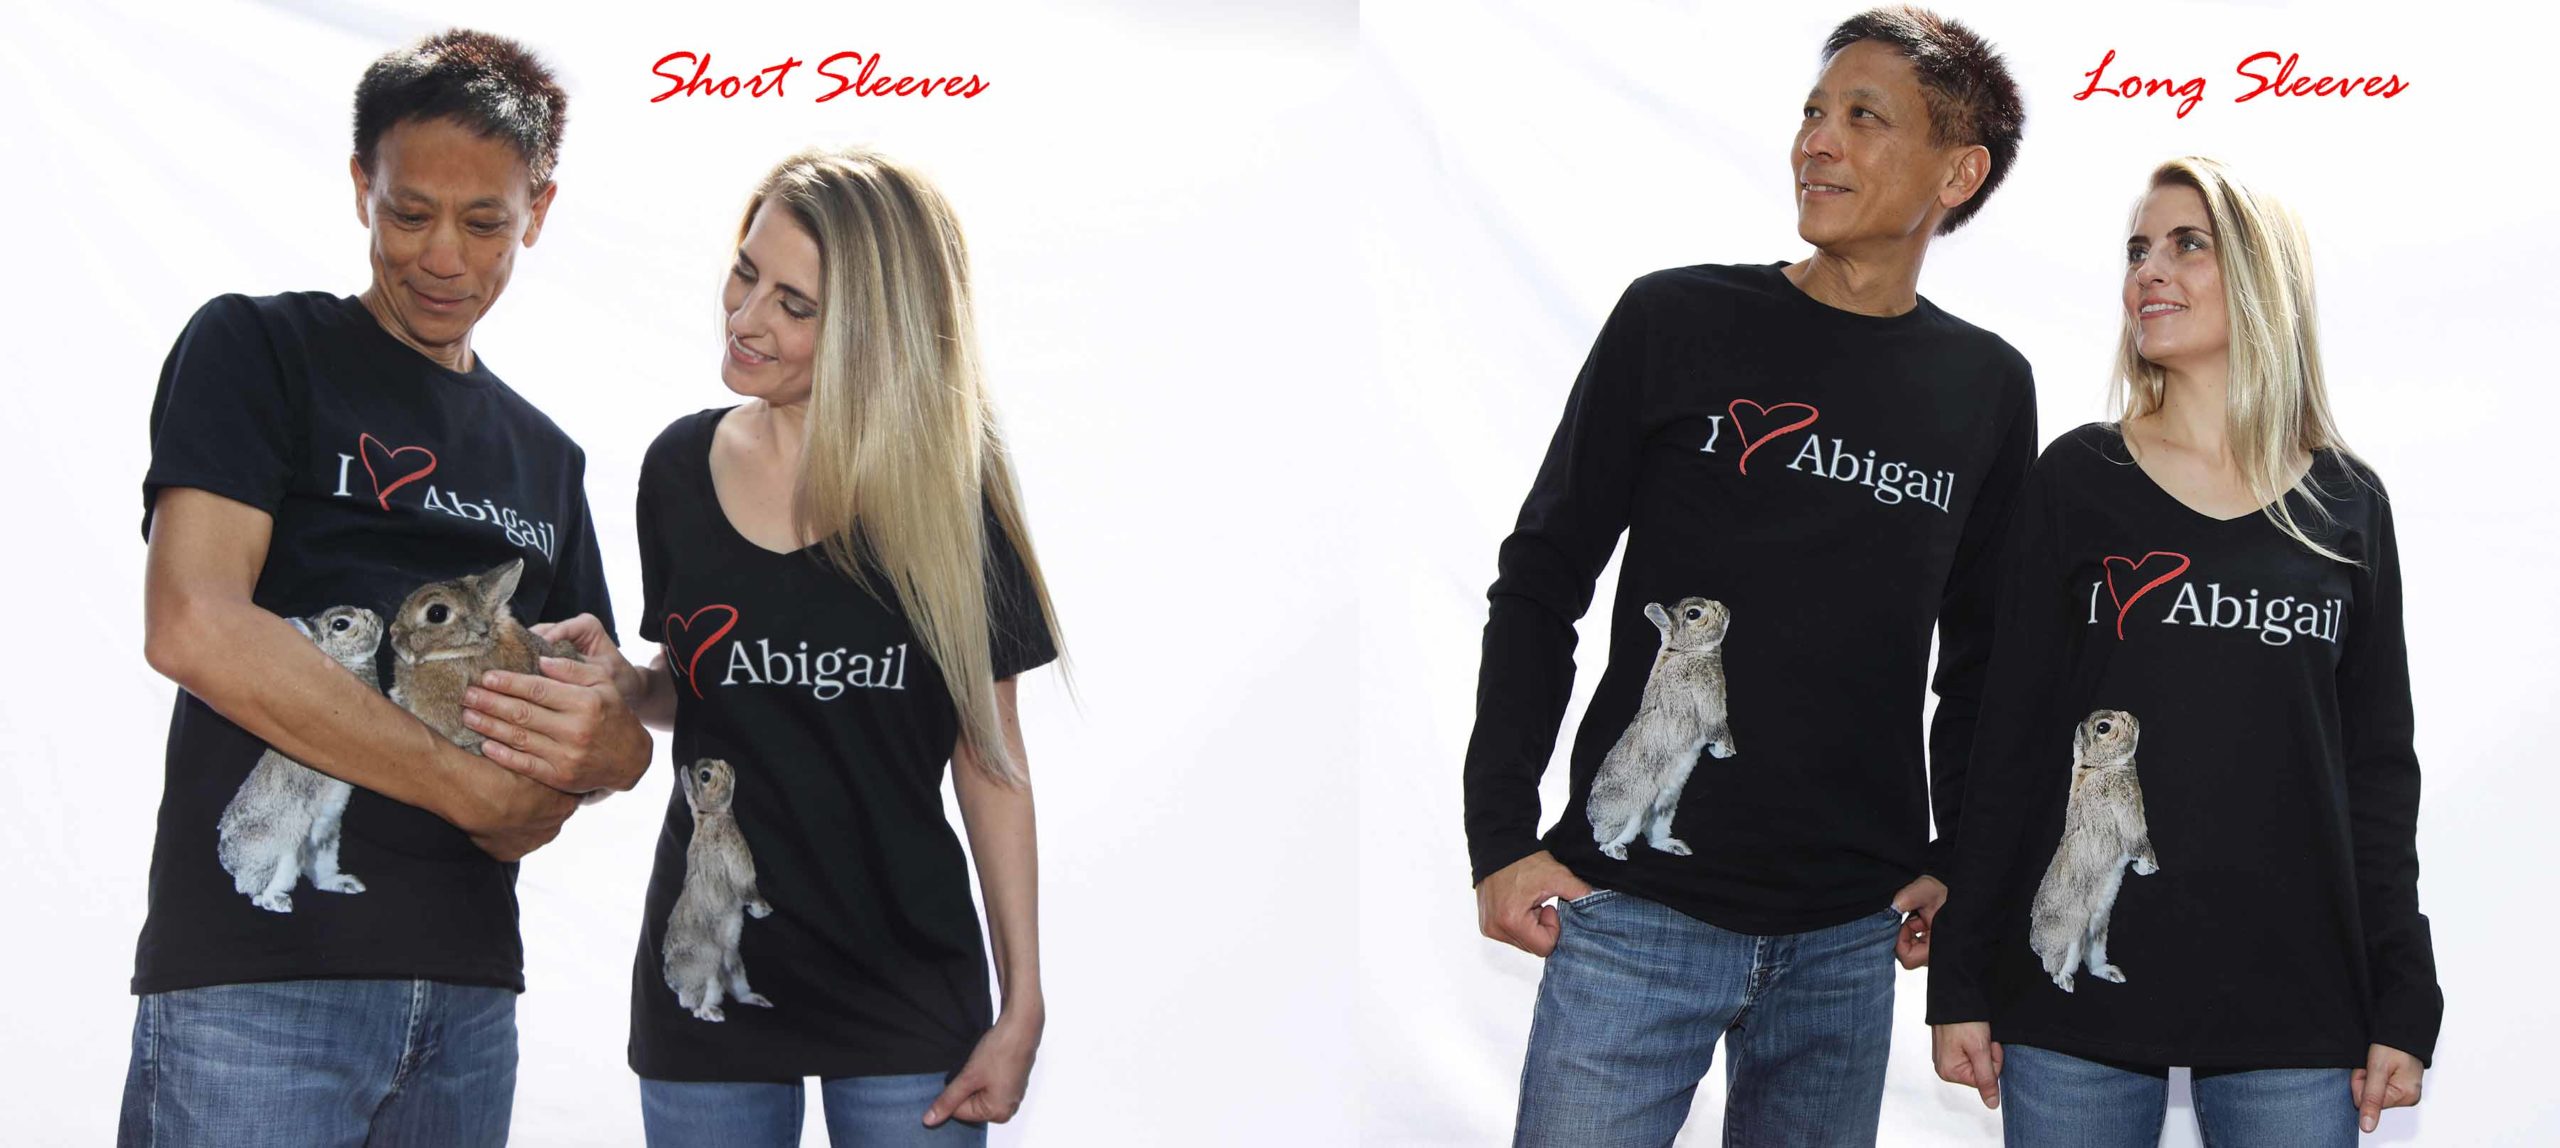 Abigail's shirts come in men's and lady's versions with long or short sleeves. This is a one-time custom order.